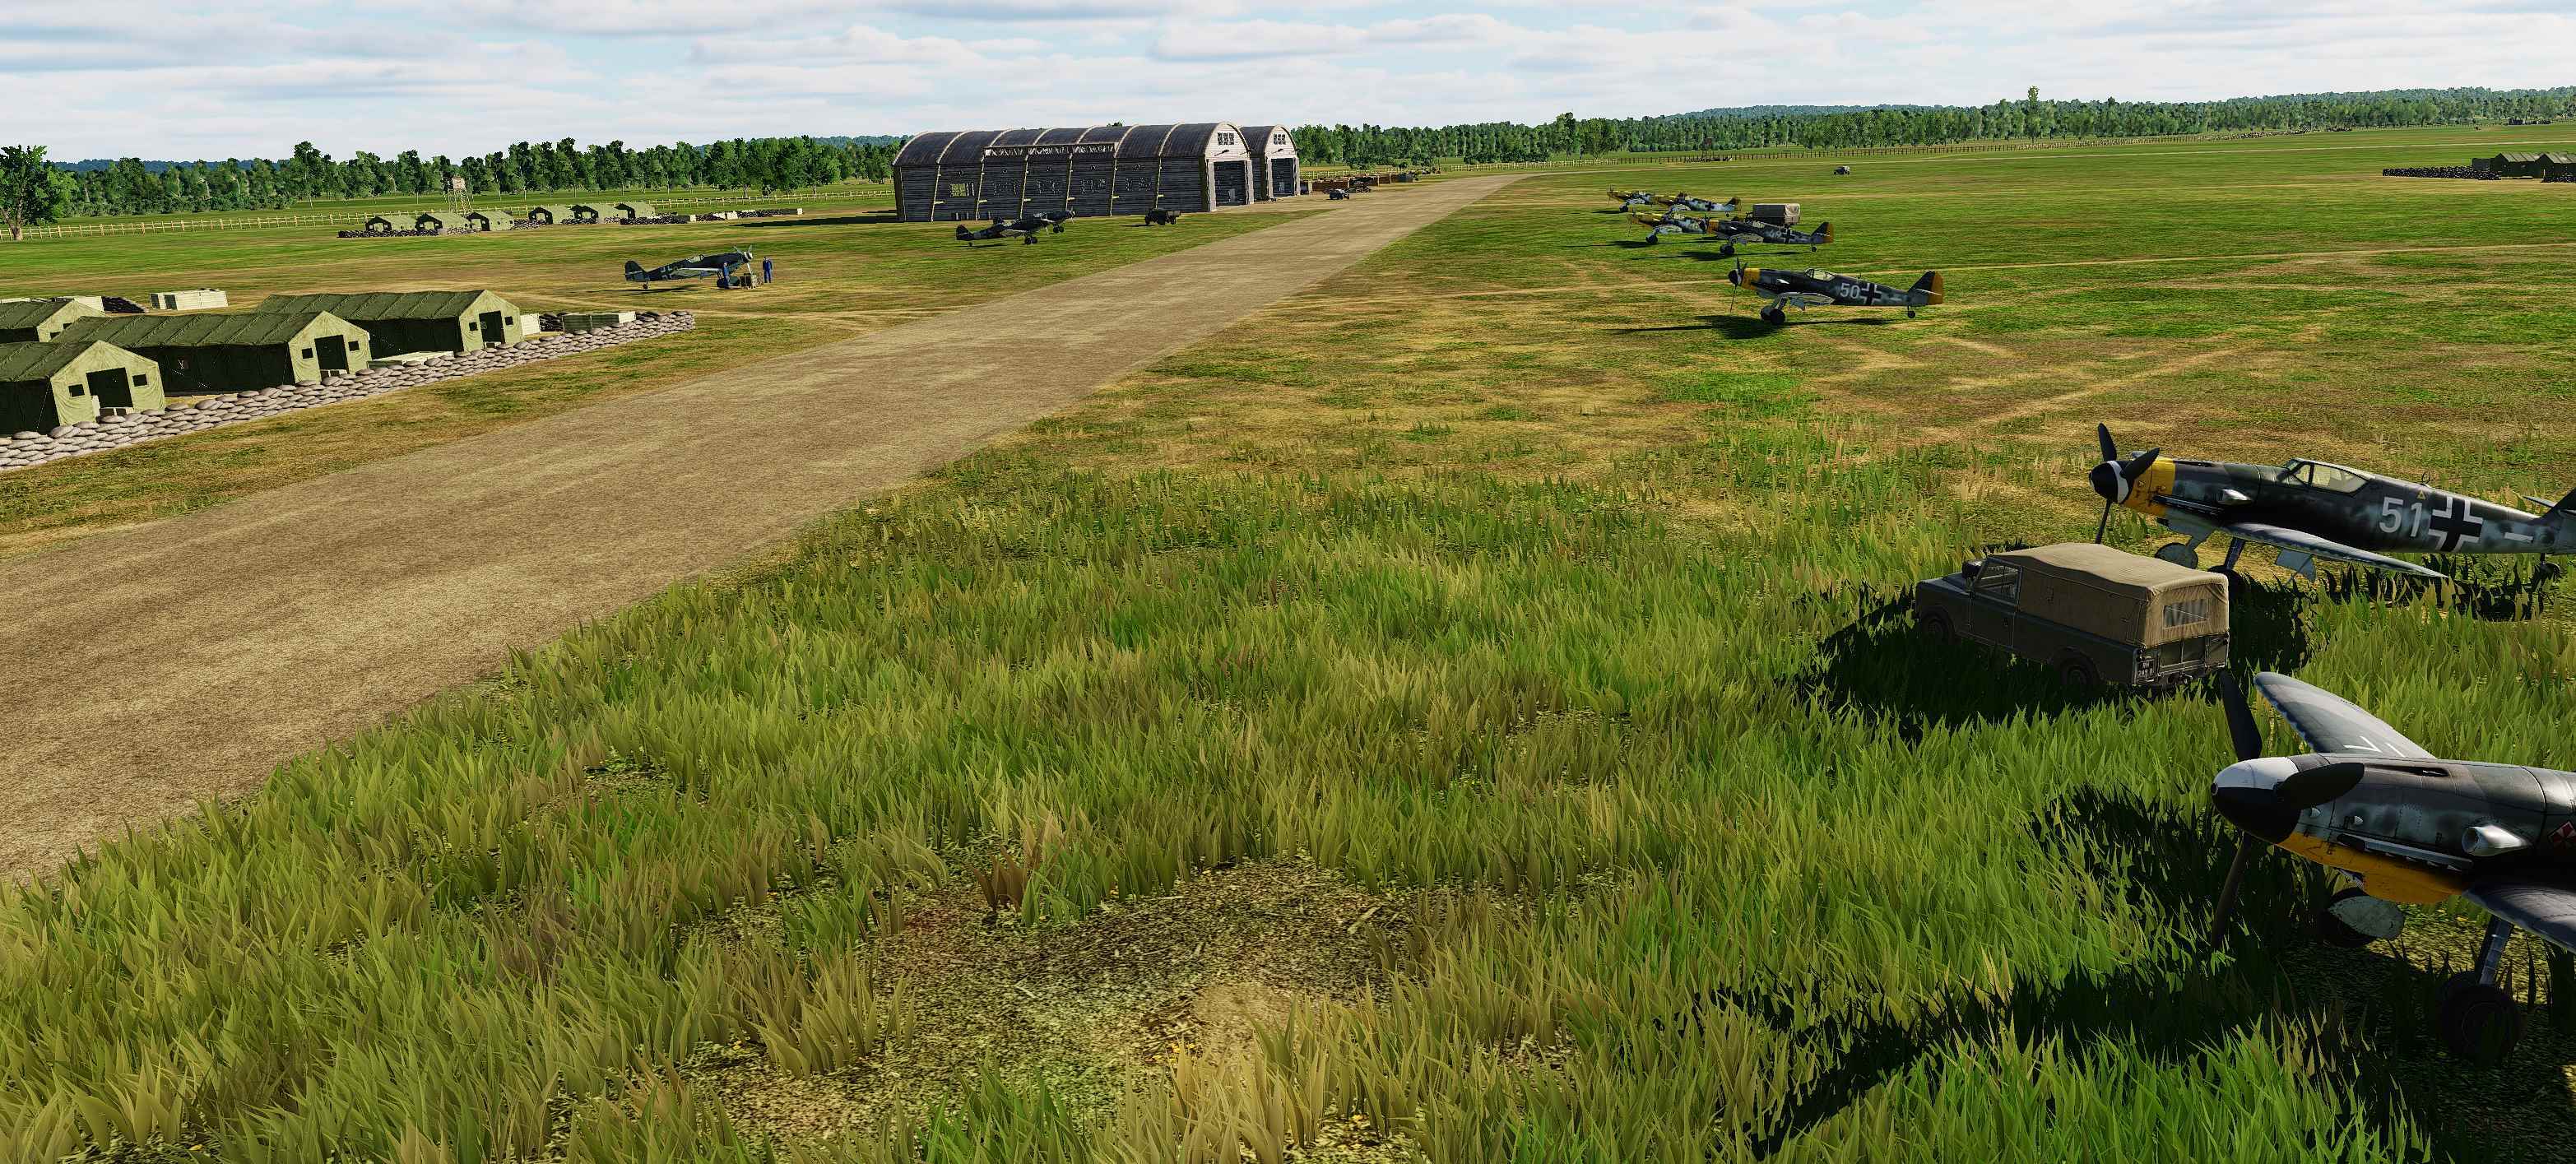 Normandy2 "Barville" AXIS Airfield